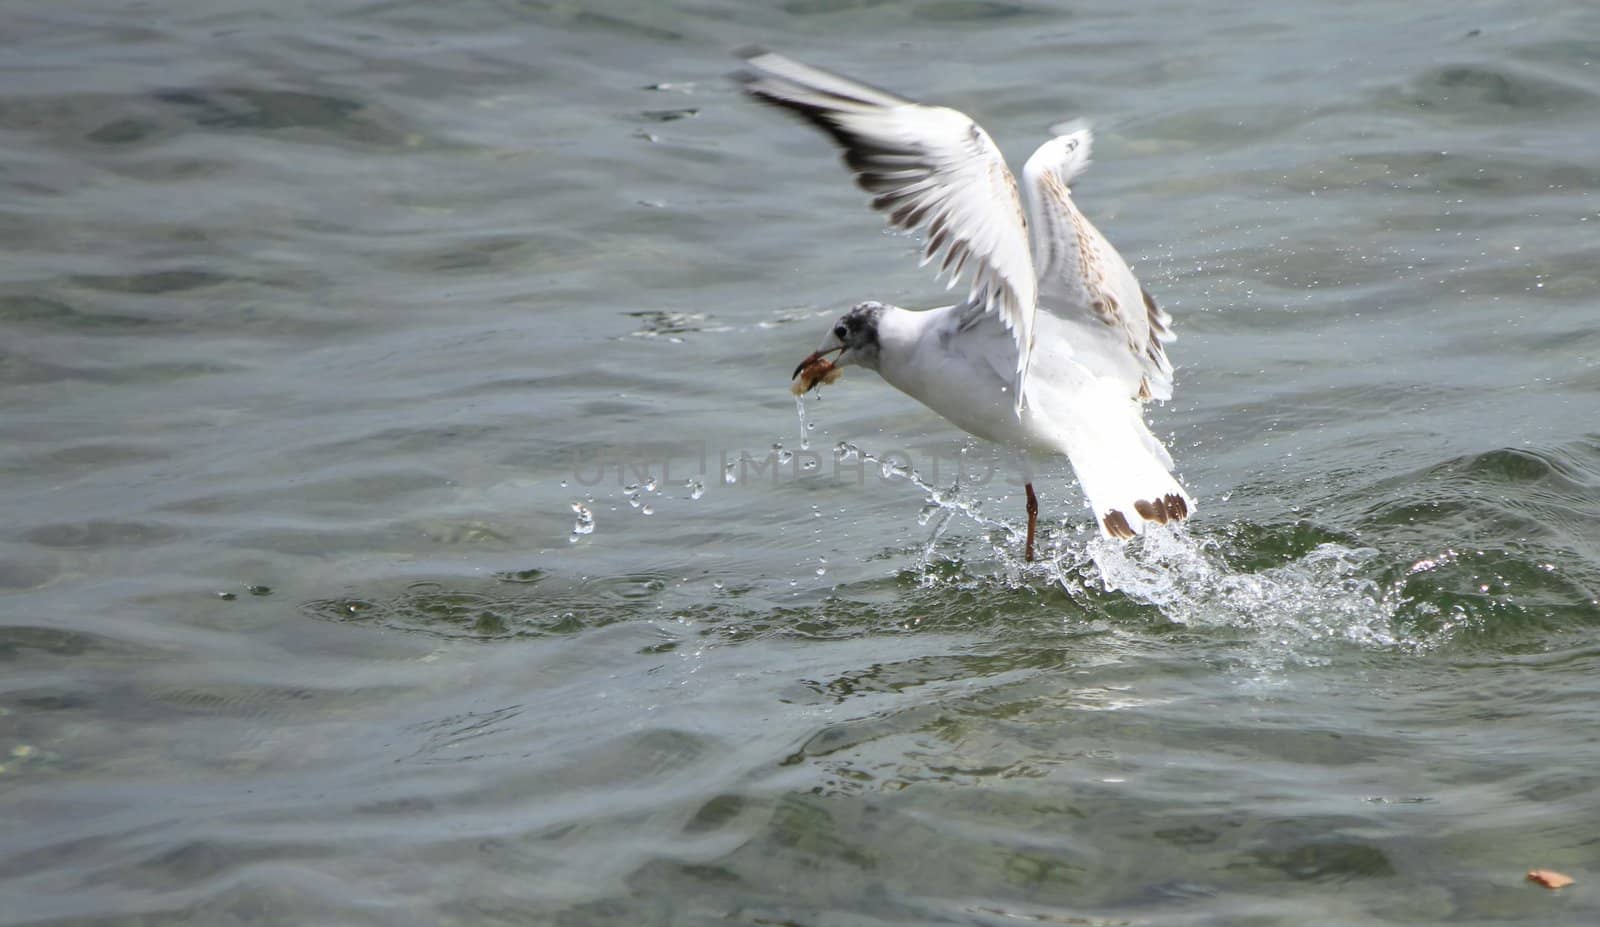 Seagull flying upon the water holding a piece of bread in its beak